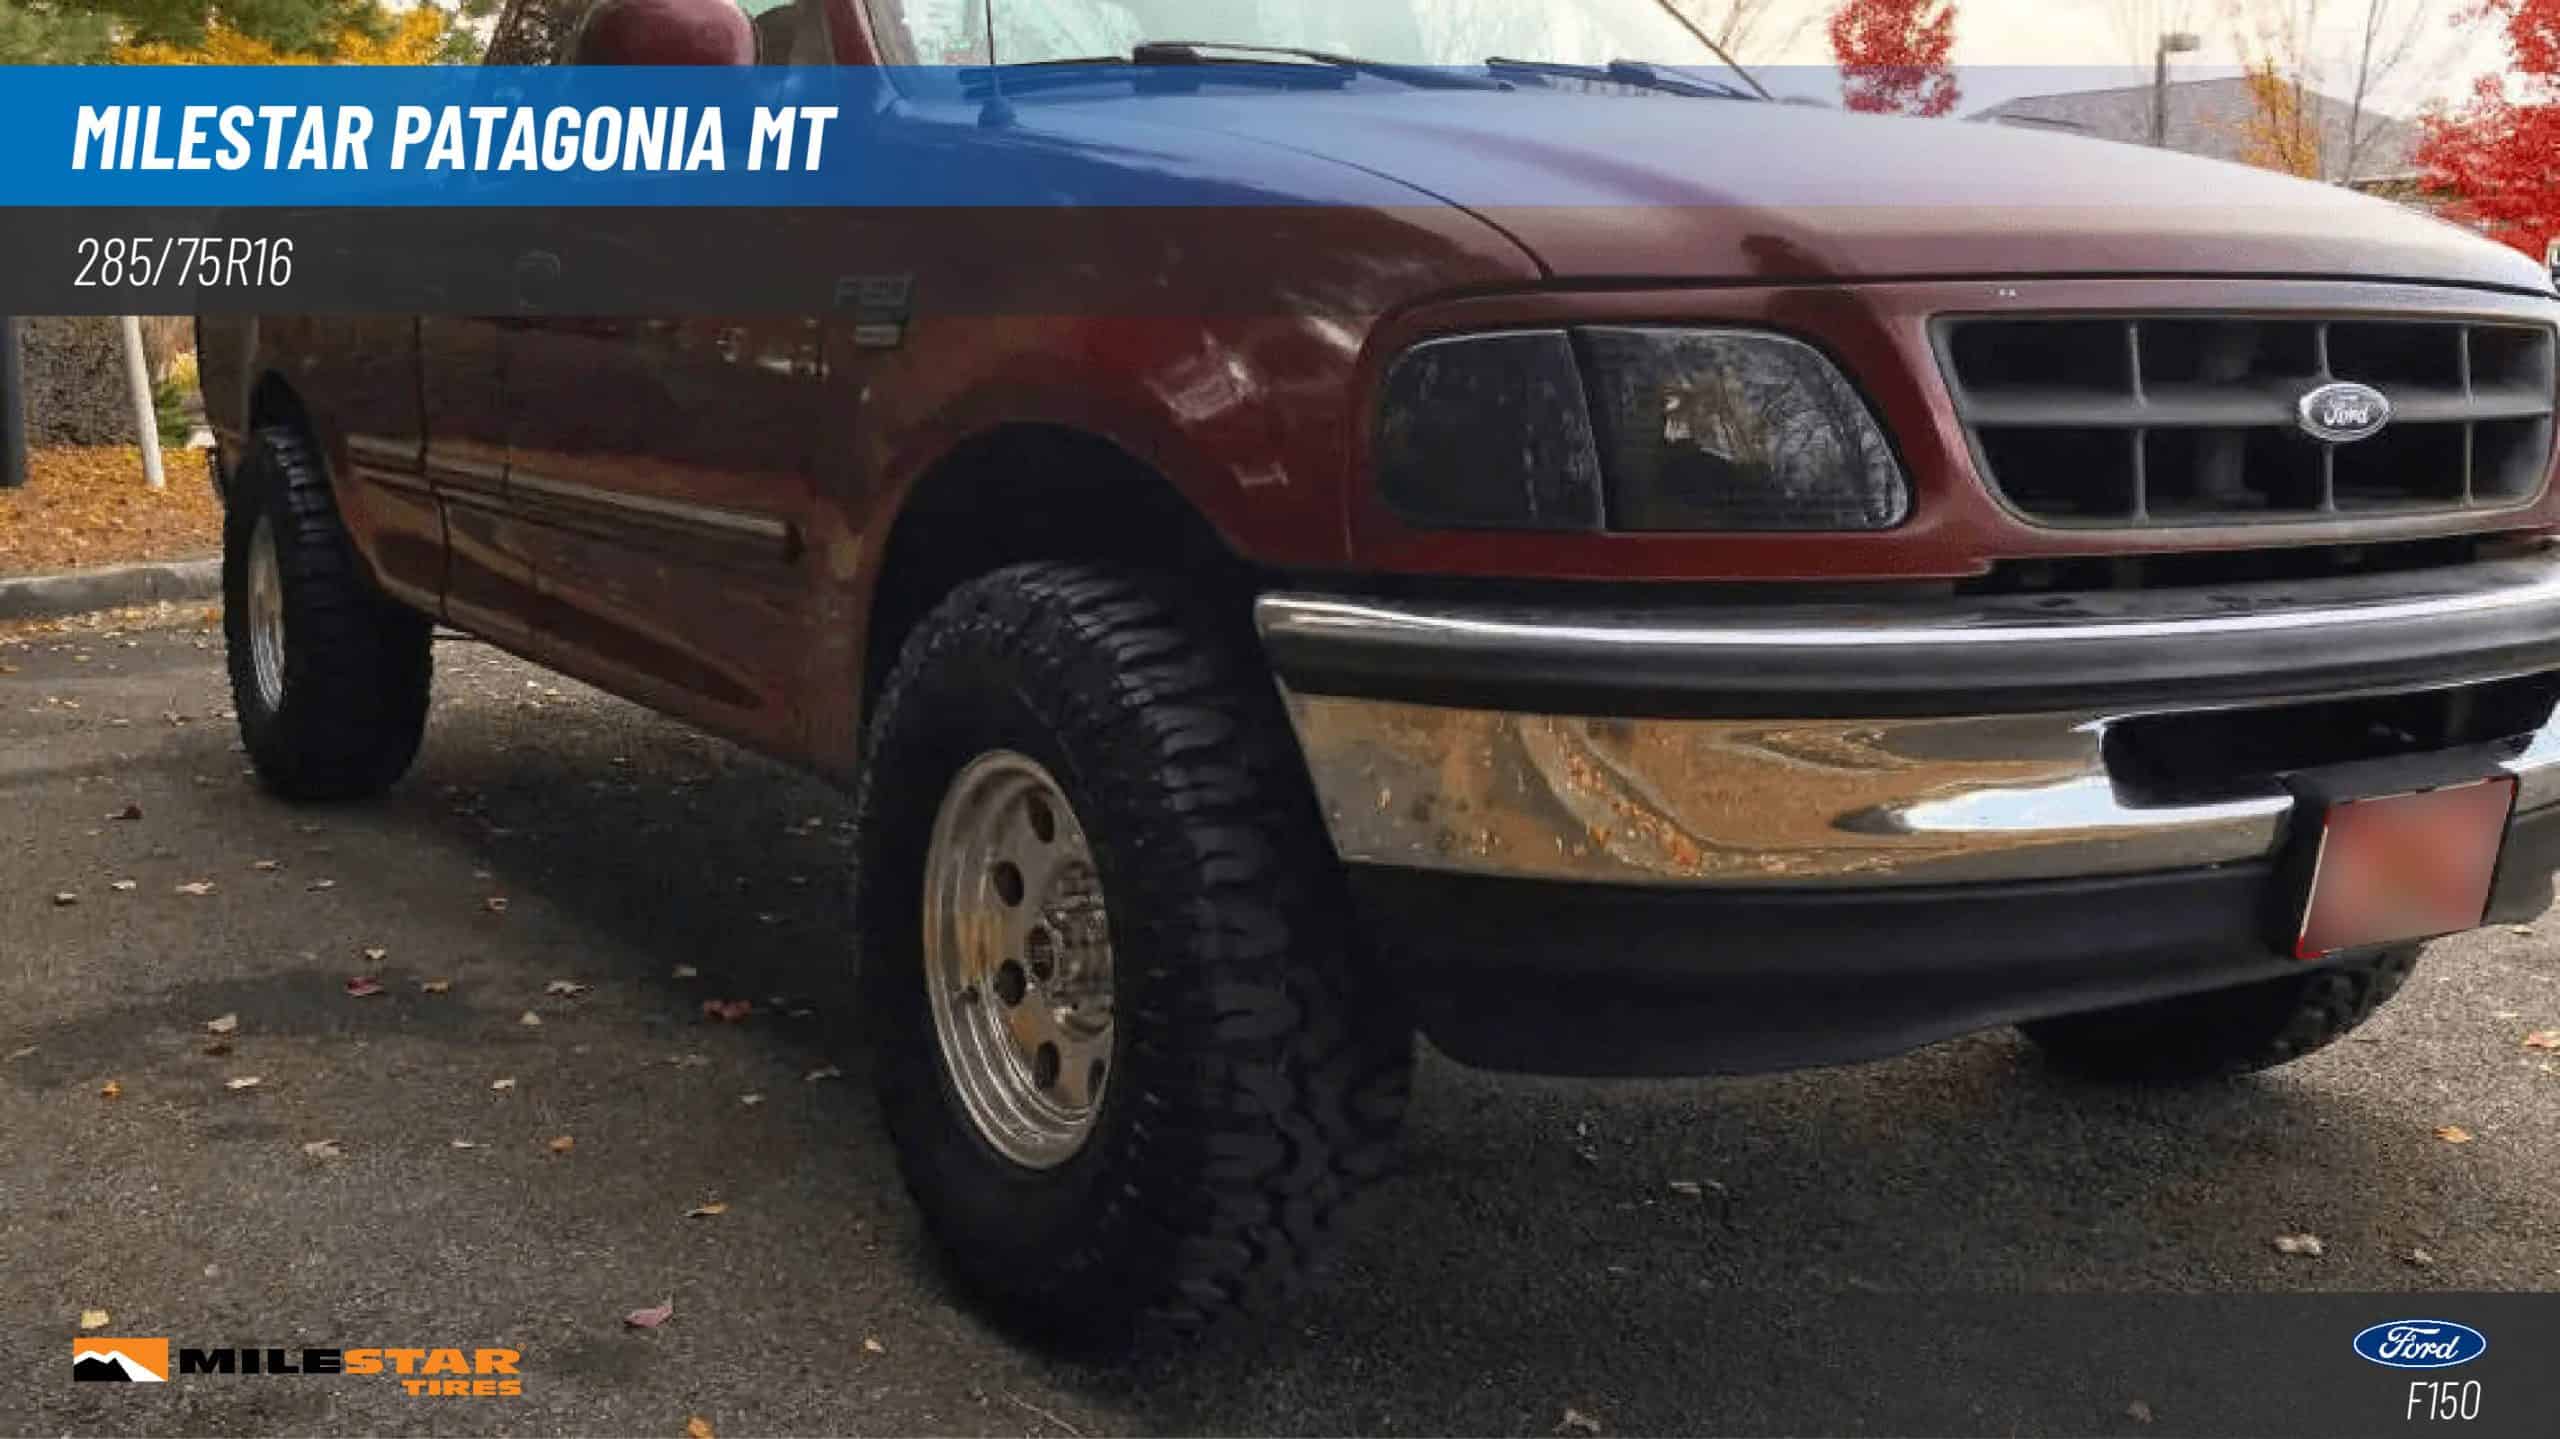 285/75R16 Ford F150 with Milestar Patagonia MT